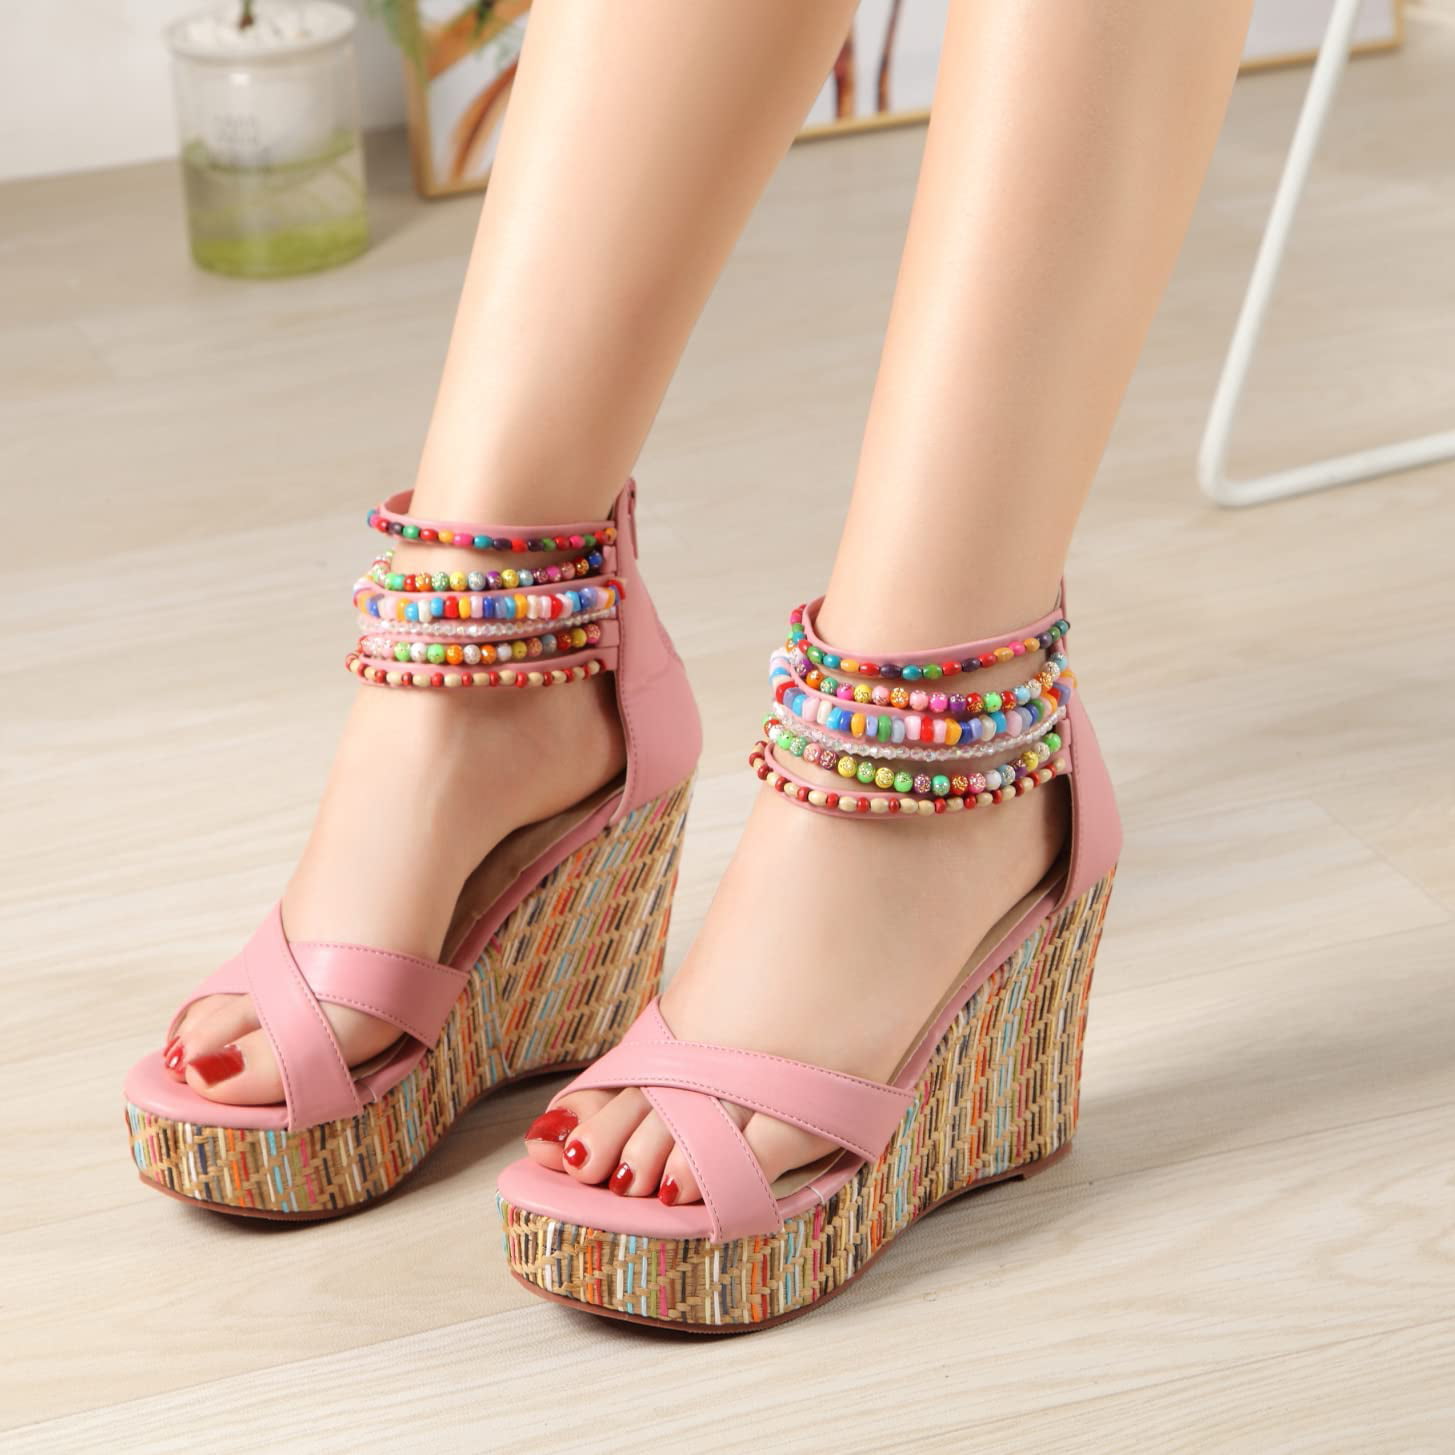 New Women Sandals Shoes Summer Wedges High Heels Fashion Ladies Peep Toe  Buckle Strap Stretch Fabric Ankle Strap Female Shoes